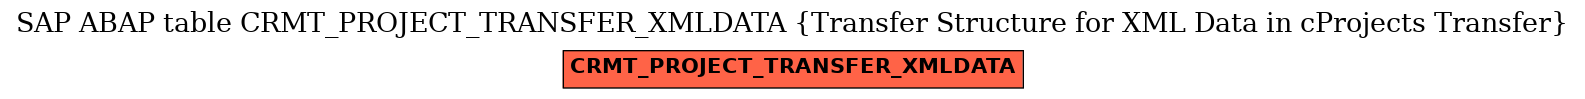 E-R Diagram for table CRMT_PROJECT_TRANSFER_XMLDATA (Transfer Structure for XML Data in cProjects Transfer)